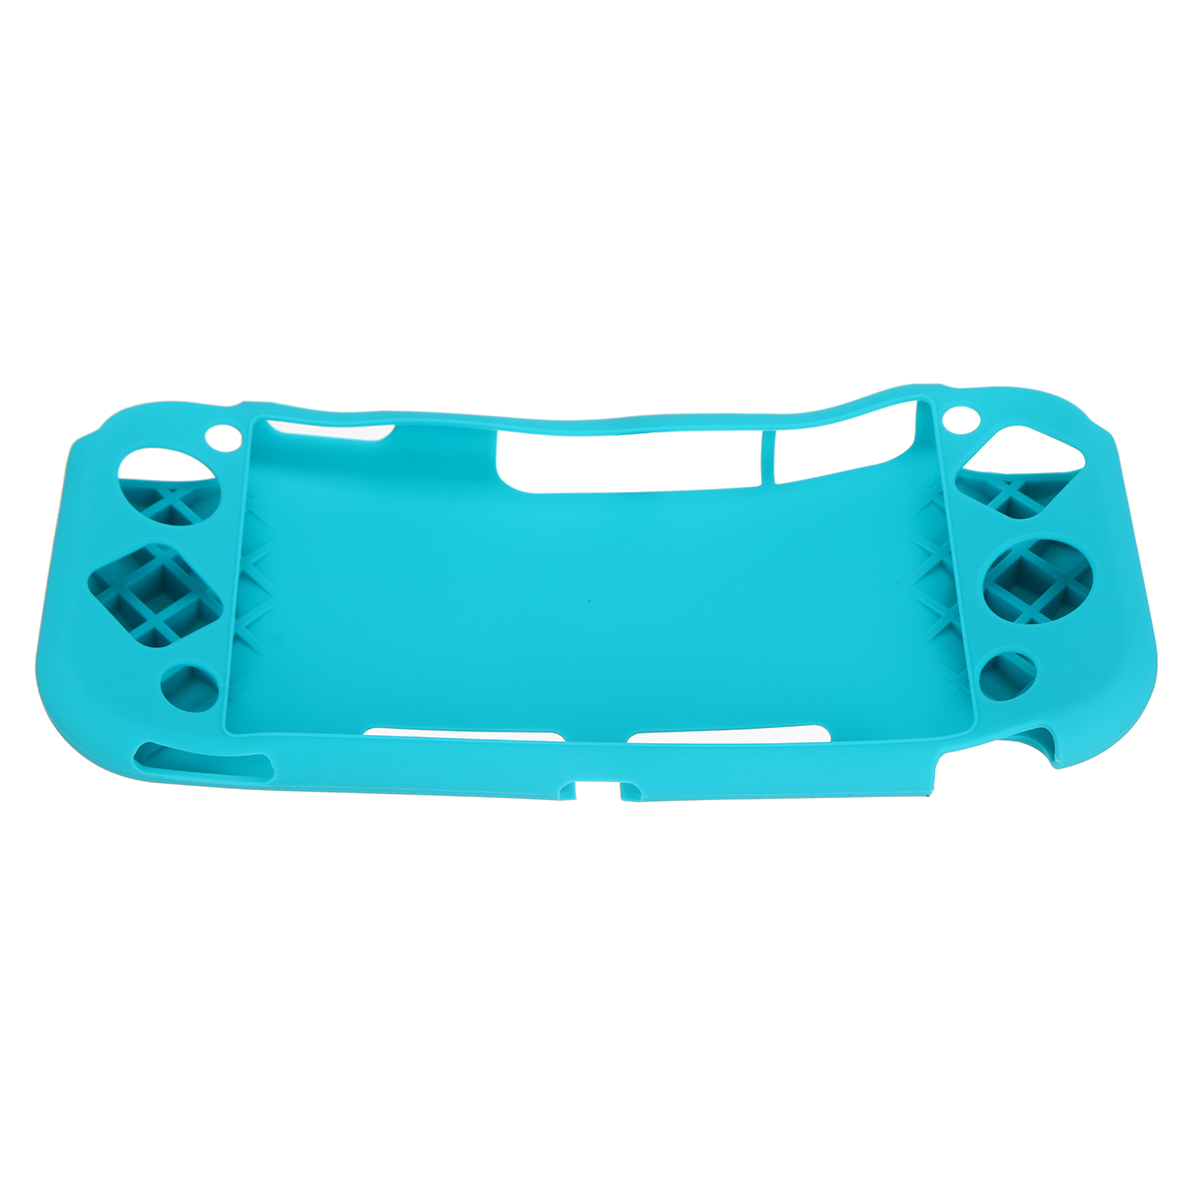 Protective Soft Silicone Case Cover Shell for Nintendo Switch Lite Game Console 22